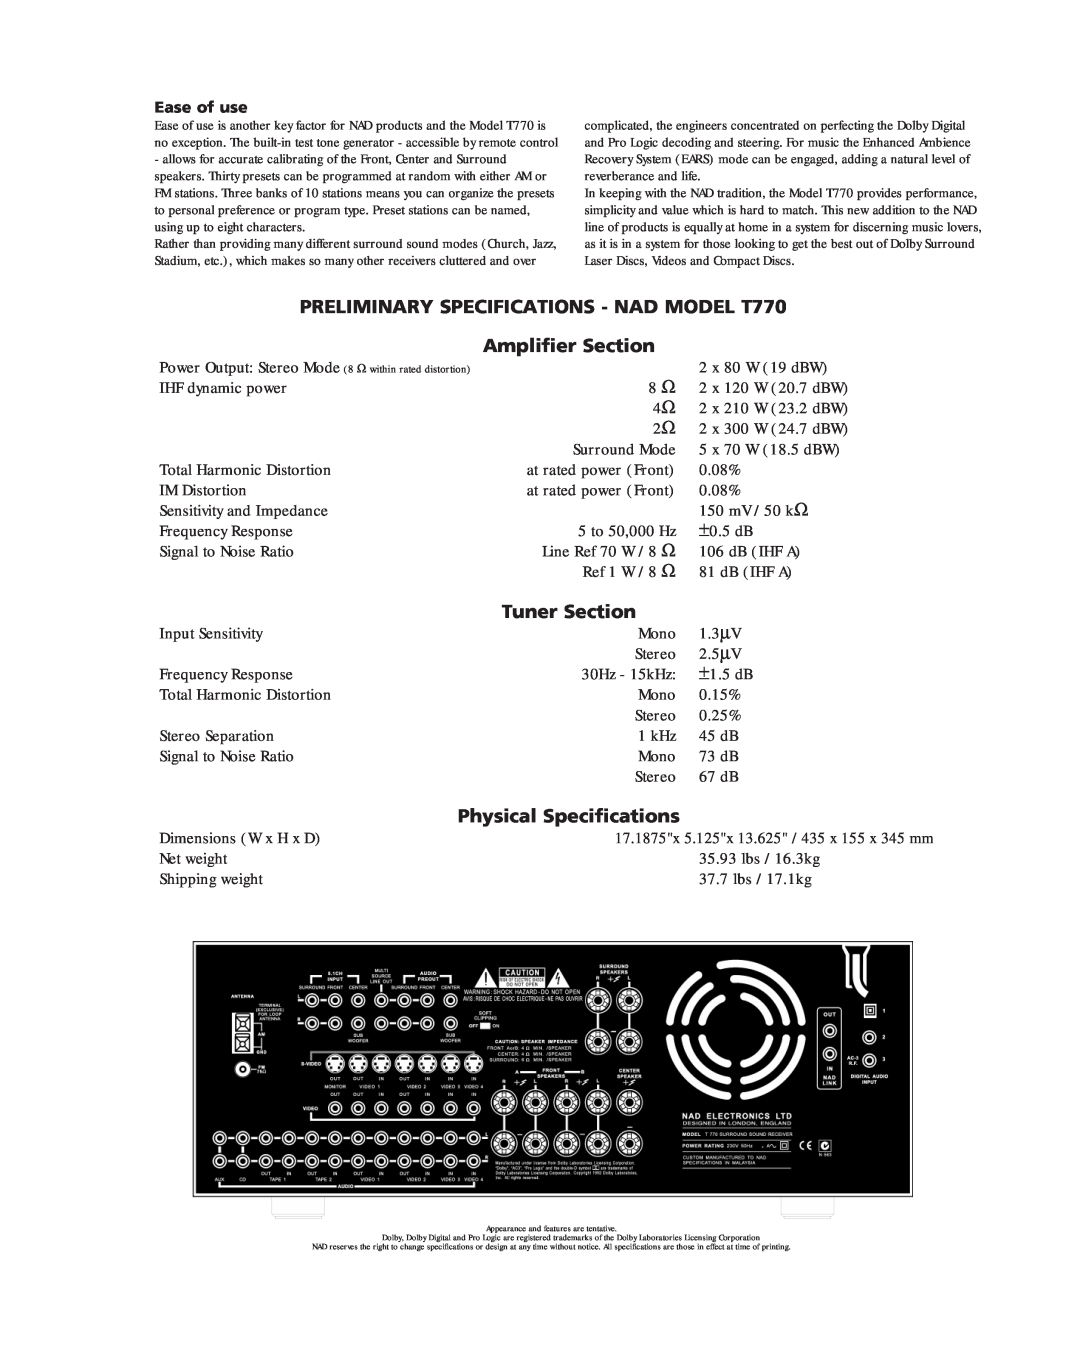 NAD brochure PRELIMINARY SPECIFICATIONS - NAD MODEL T770, Amplifier Section, Tuner Section, Physical Specifications 